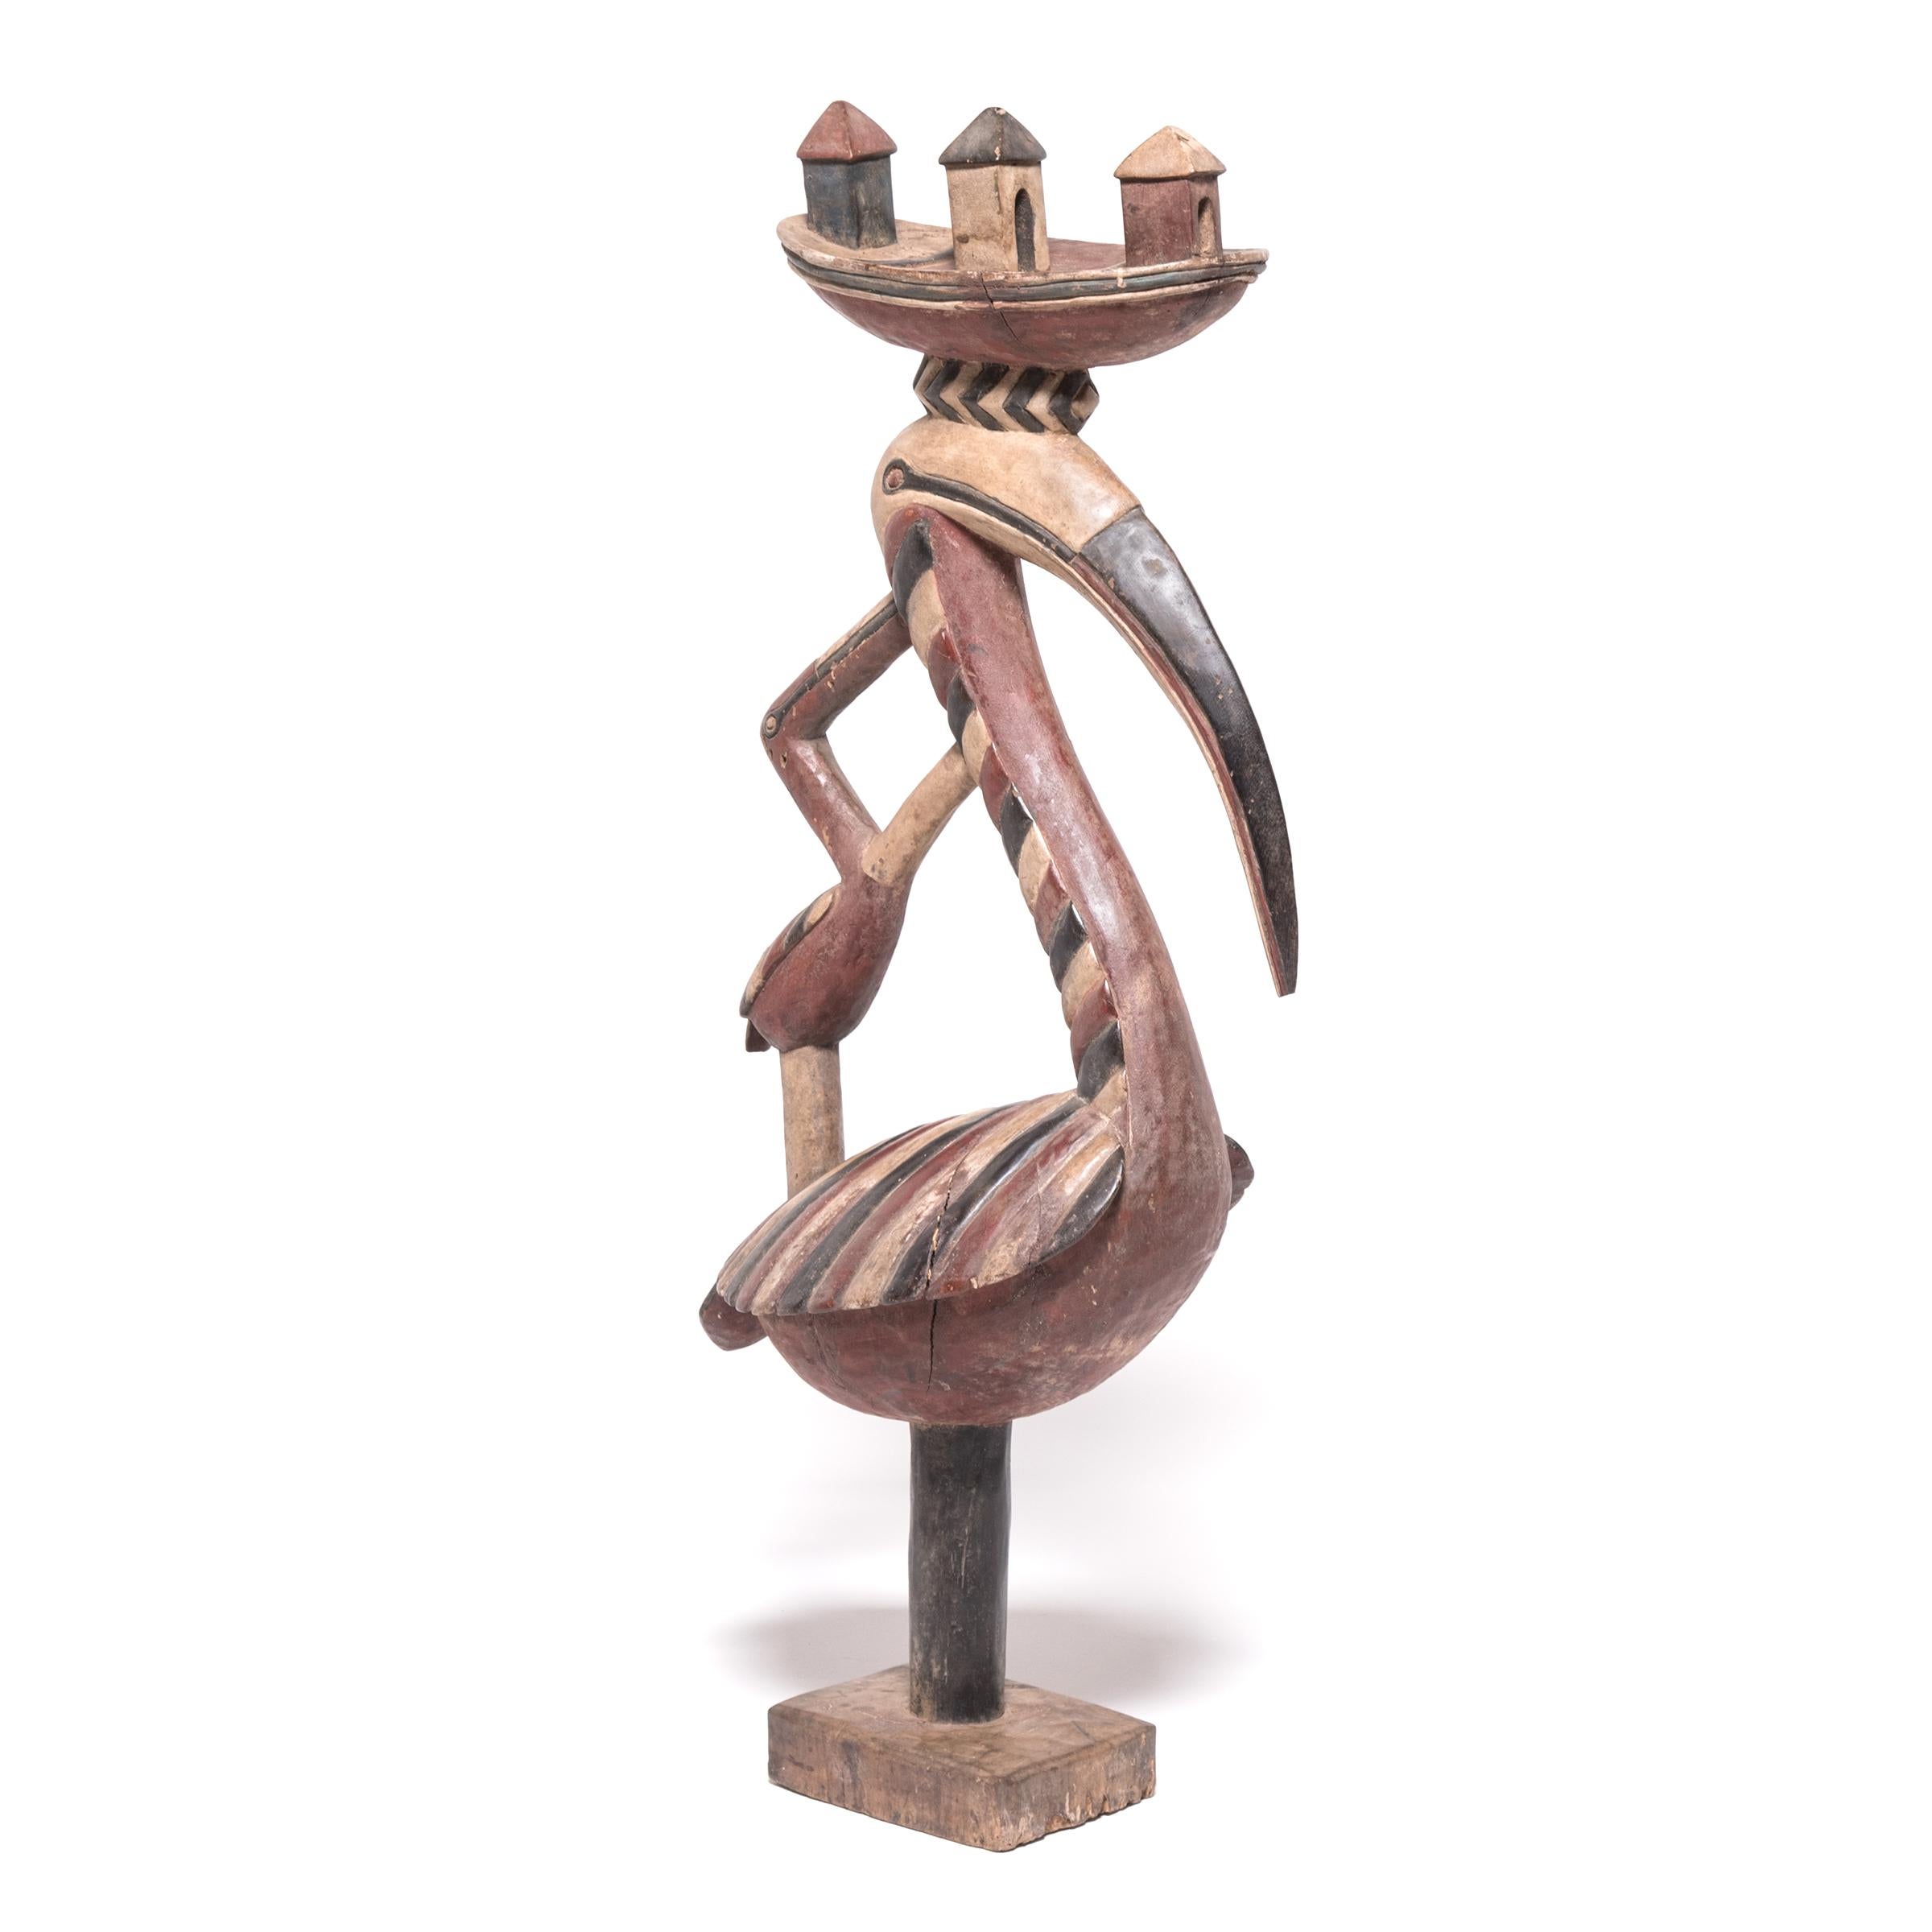 This graceful sculpture of a long-necked bird is a headdress known as 